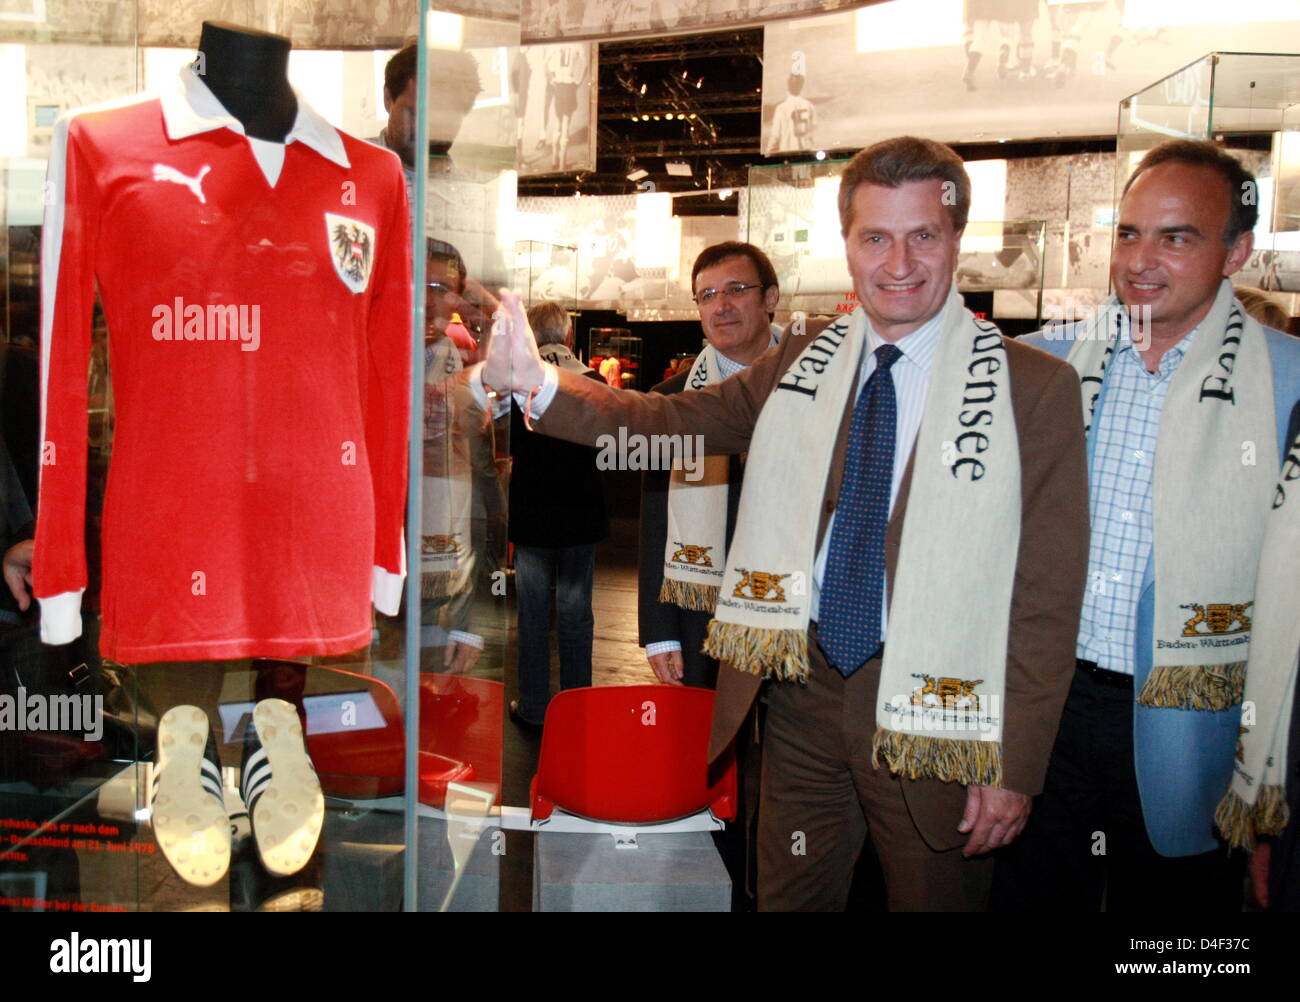 Prime Minister of the state of Baden-Wuerttemberg Guenther Oettinger (L) and former German international football player Hansi Mueller (R) are pictured with Mueller's original jersey at the exhibition 'Das Wunder von Bregenz' (The miracle of Bregenz) in Bregenz, Austria, 07 June 2008. From 7 till 29 June 2008 the 'Haus der Geschichte Baden-Wuerttemberg' presents an impression of Ge Stock Photo